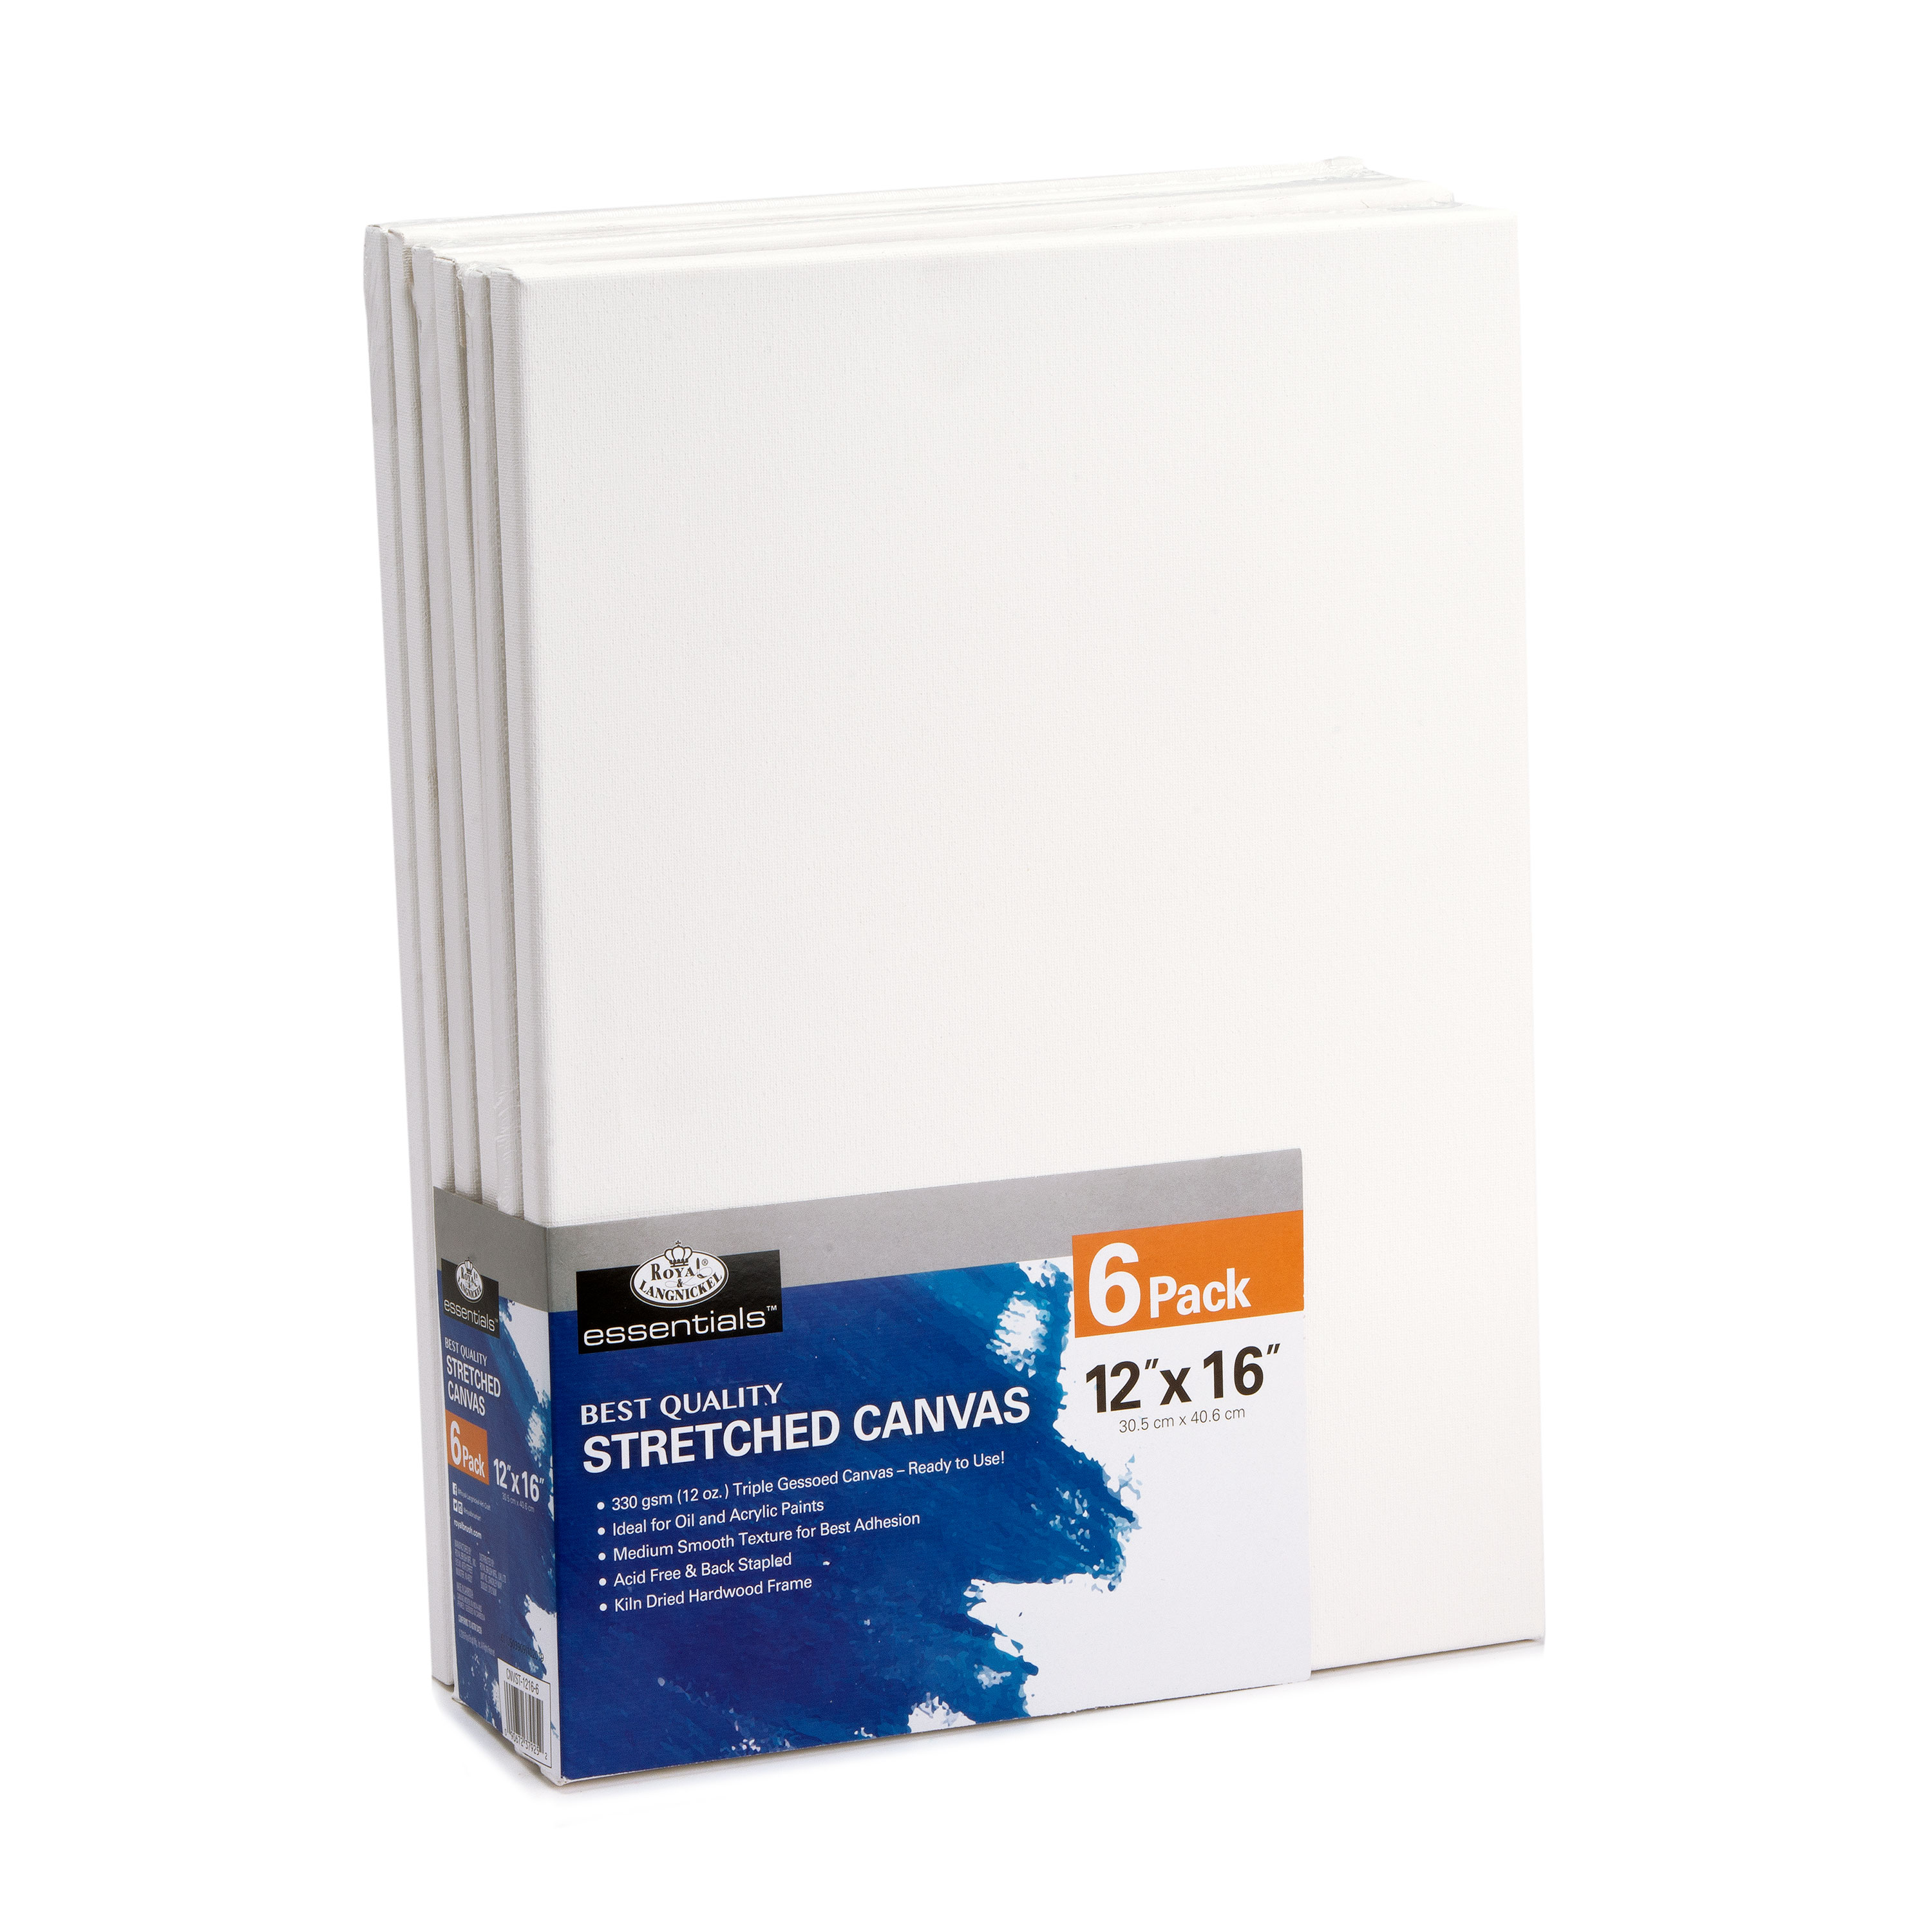 Royal & Langnickel Essentials 12" x 16" Stretched Canvas, 6Pk - image 1 of 9